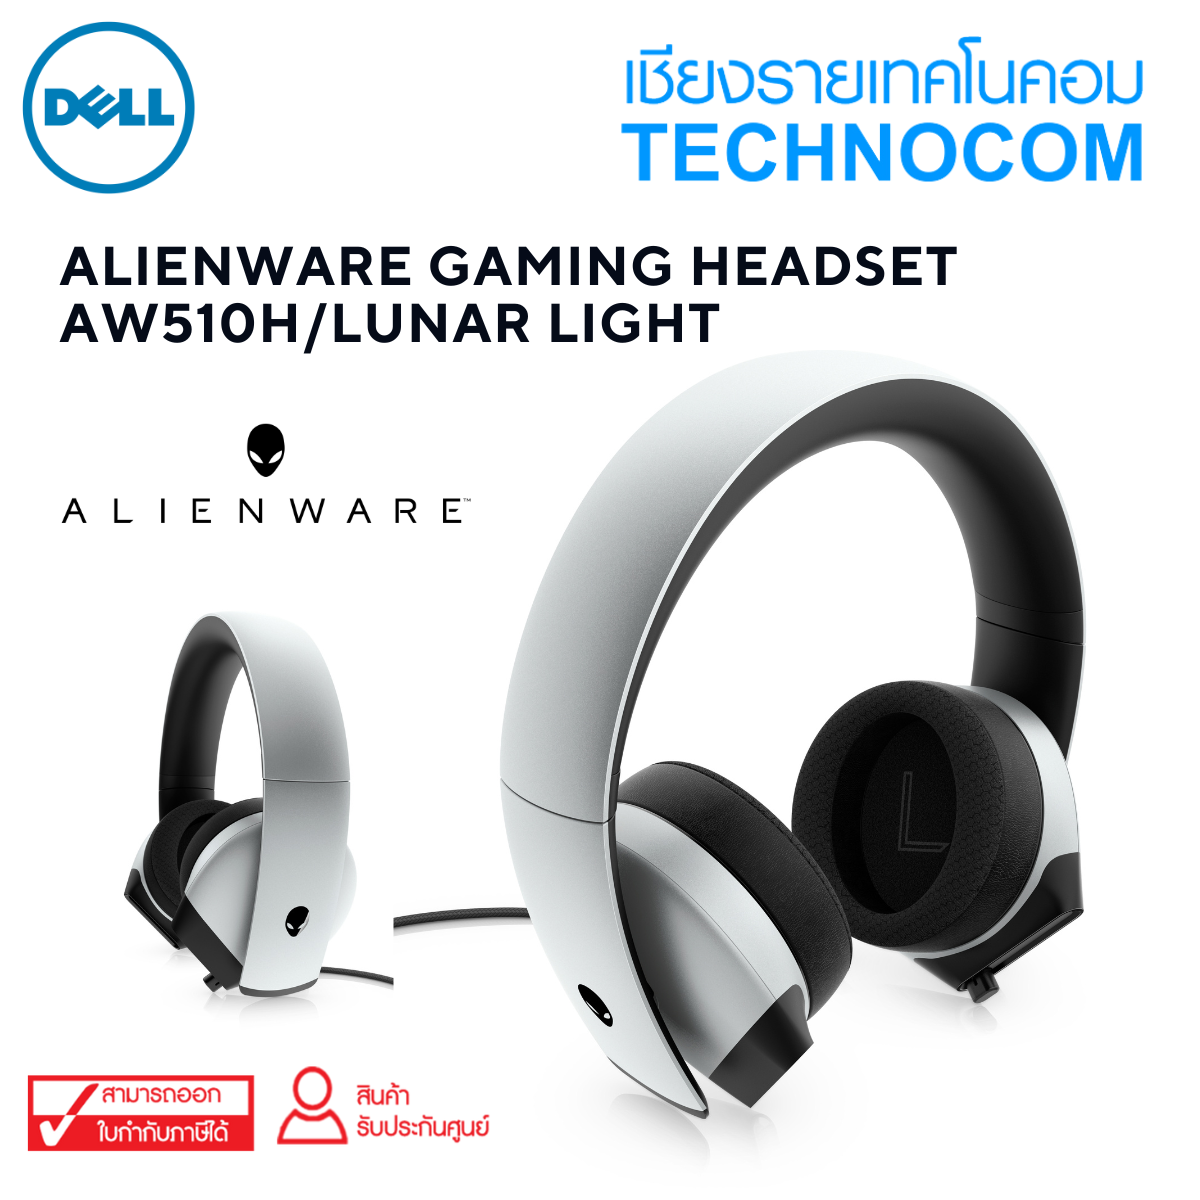 DELL ALIENWARE GAMING HEADSET AW510H/LUNAR LIGHT